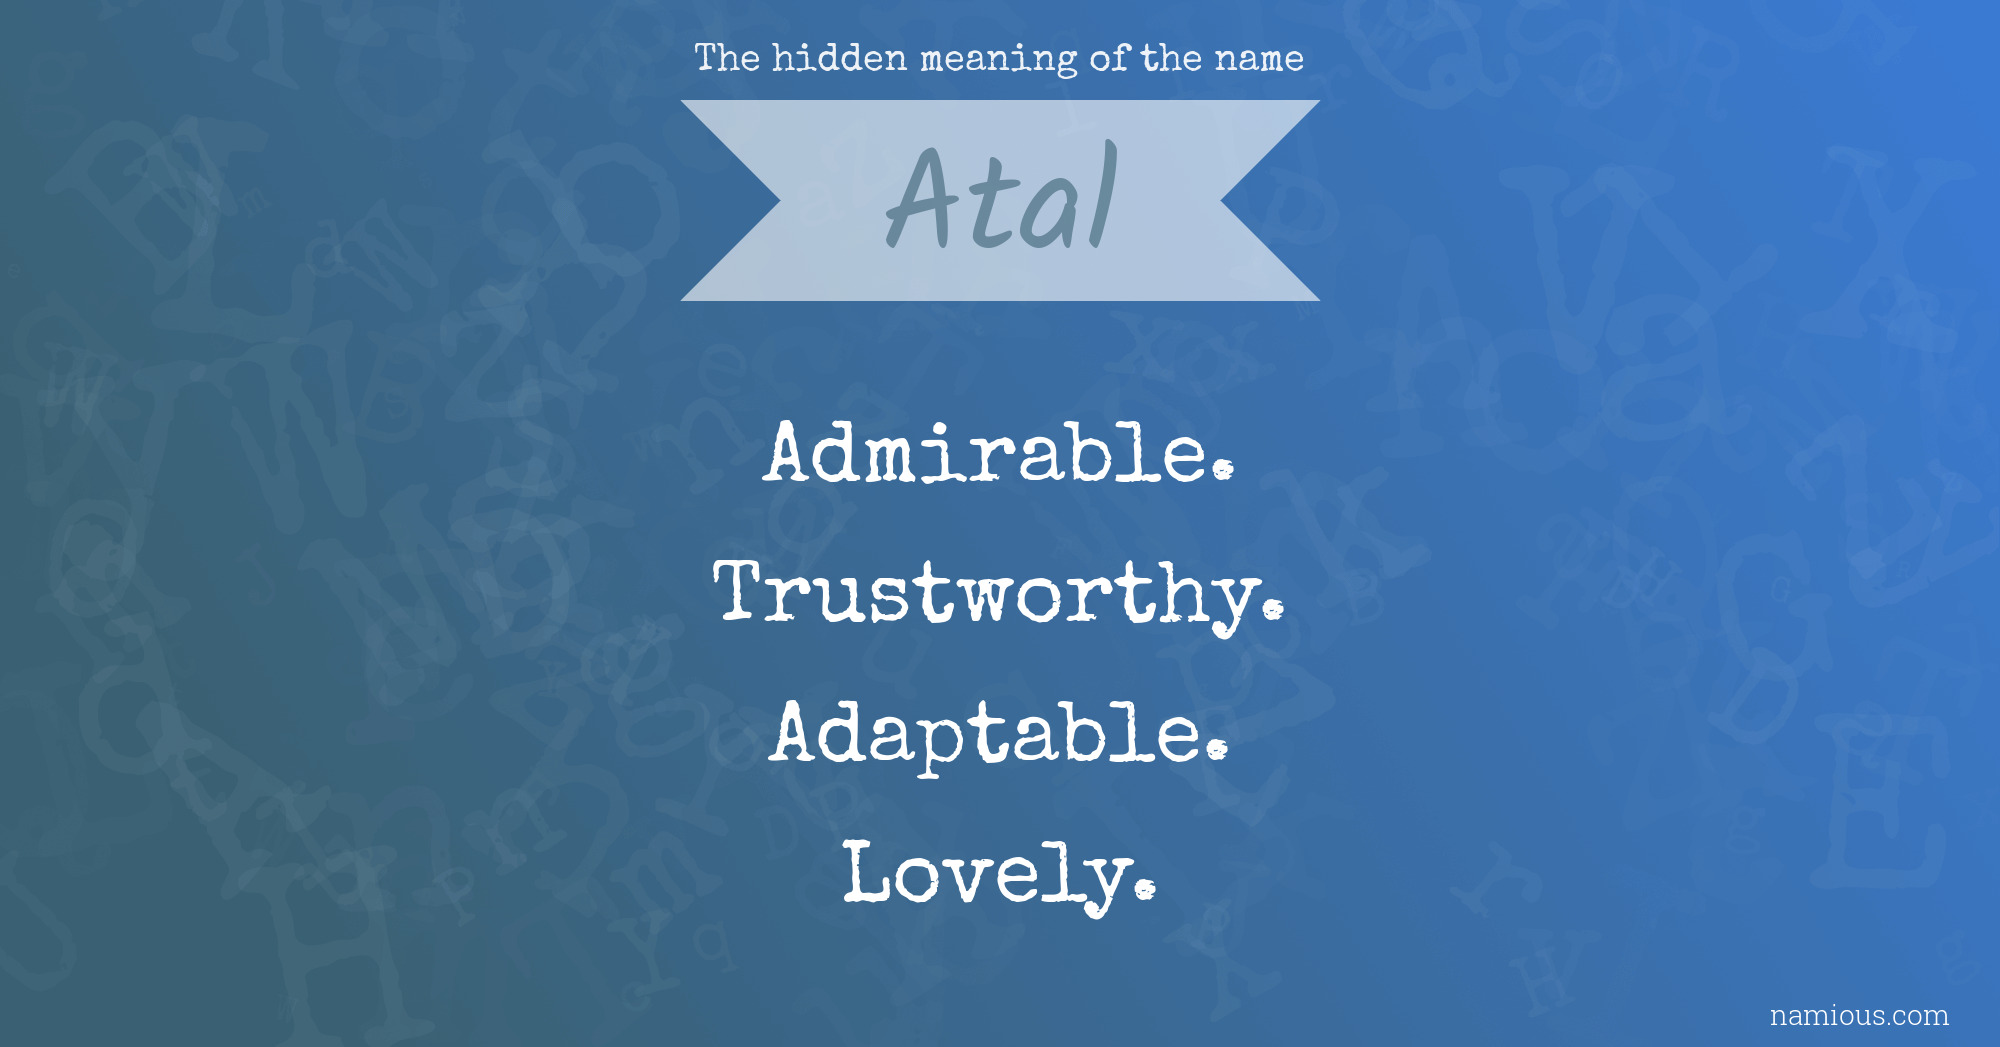 The hidden meaning of the name Atal